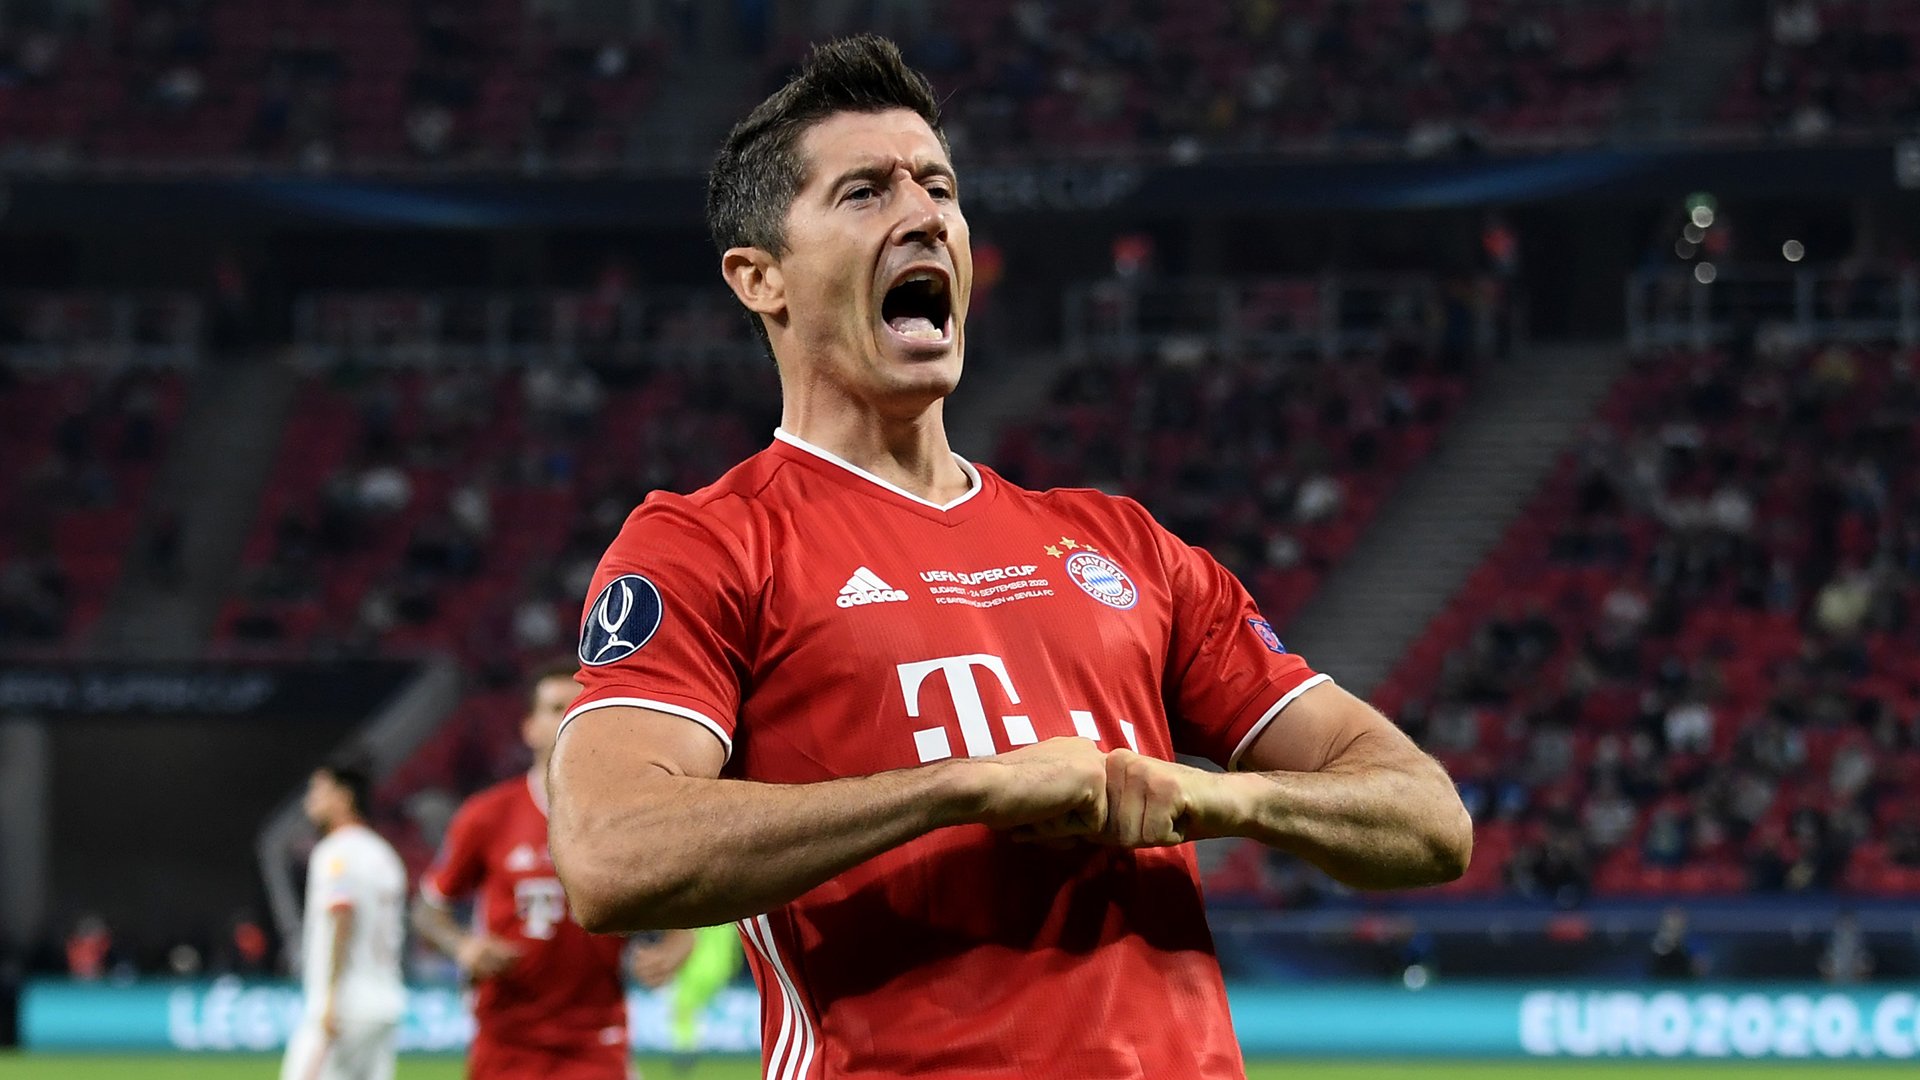 Mancini: It's a pity we never got to see Lewandowski playing in Serie A